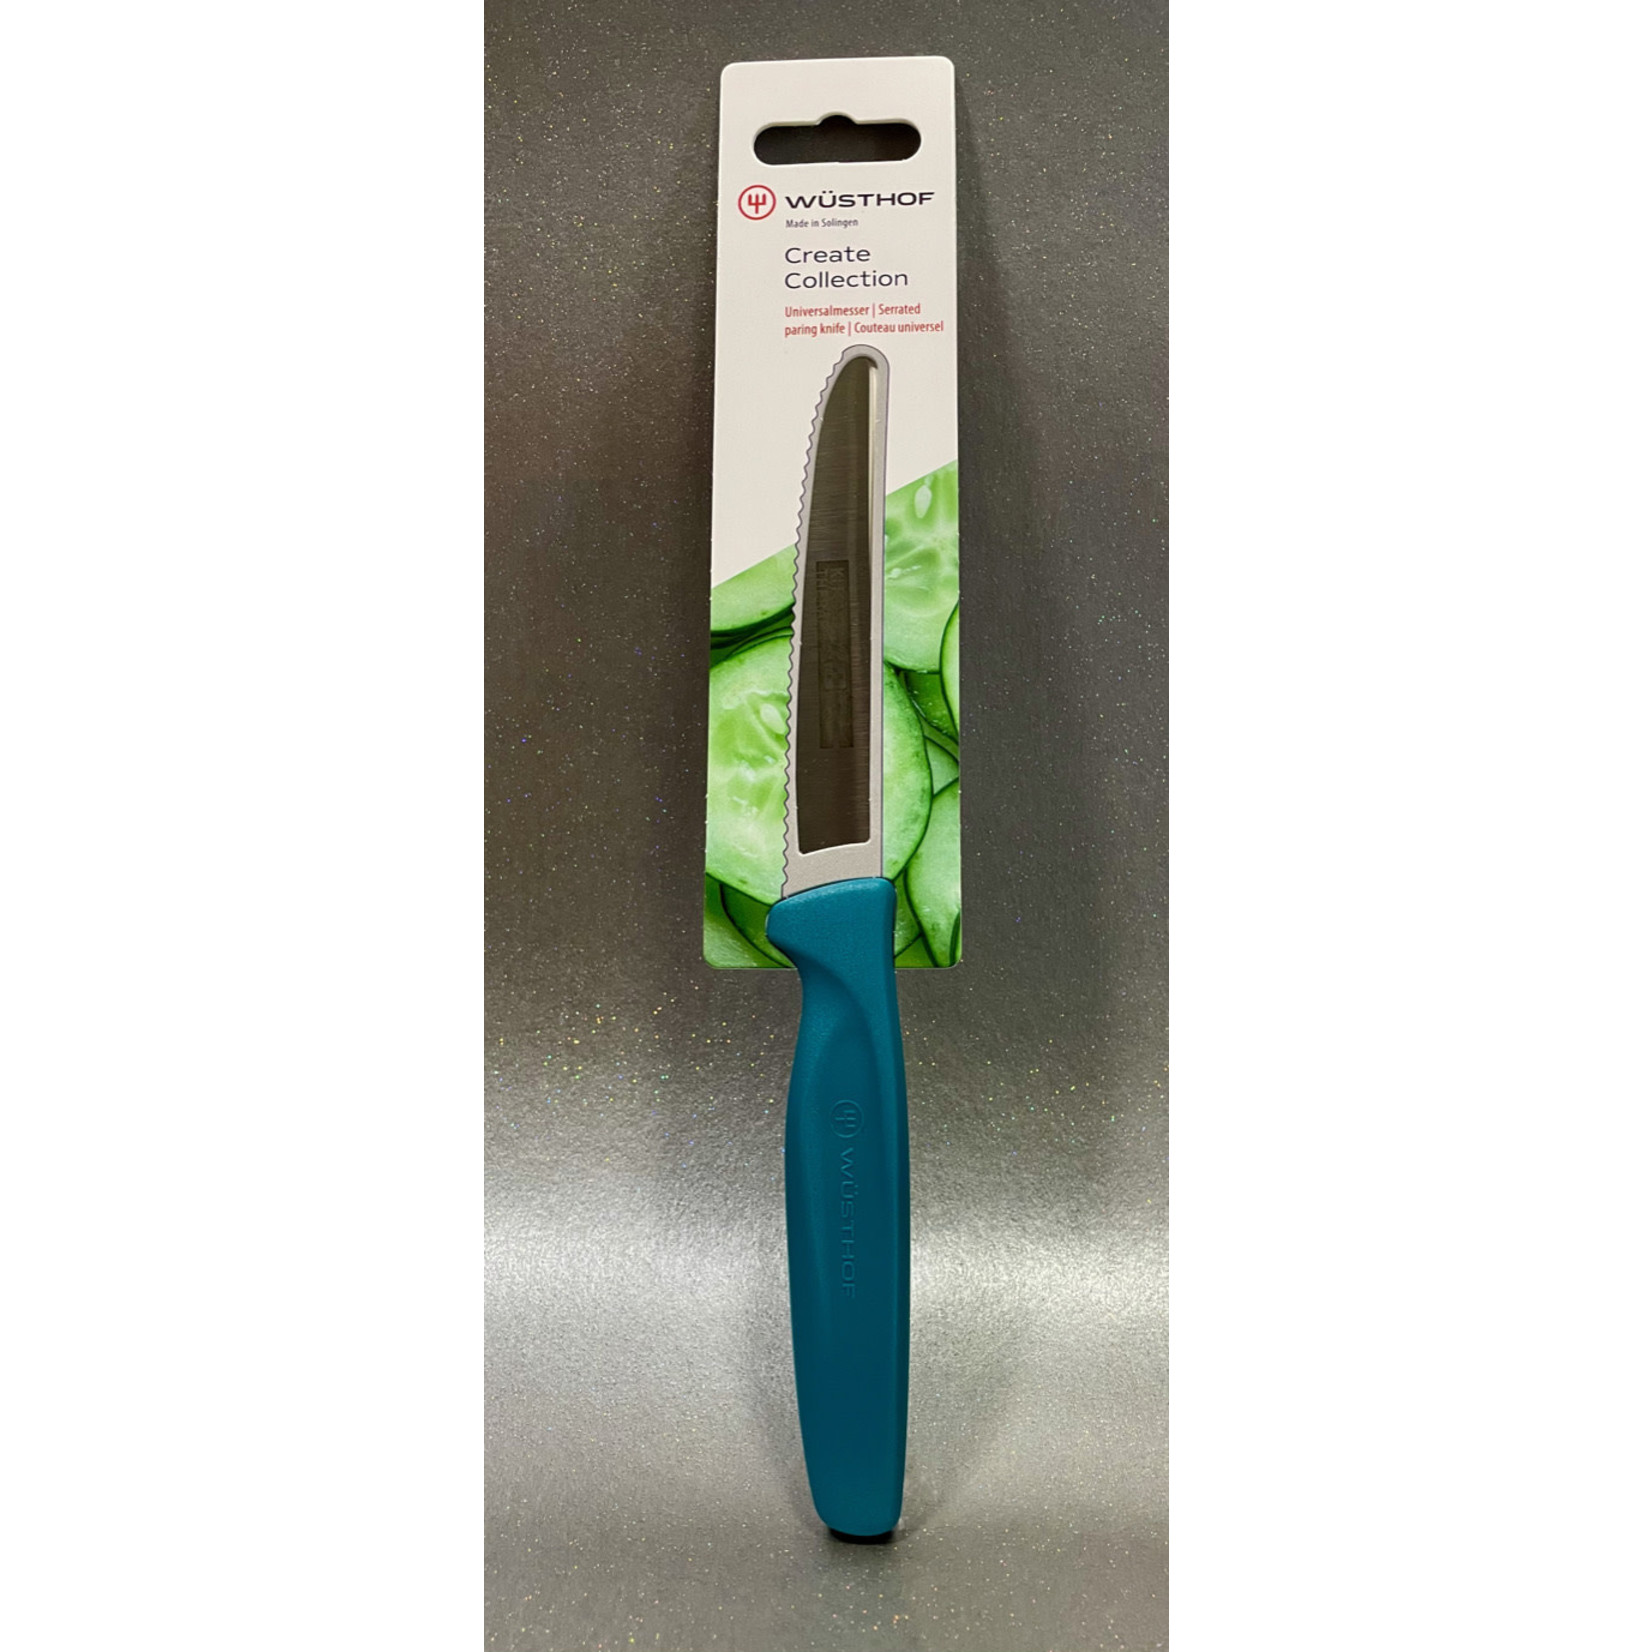 WUSTHOF WUSTHOF Kitchen Therapy Serrated Utility Knife 4" Teal